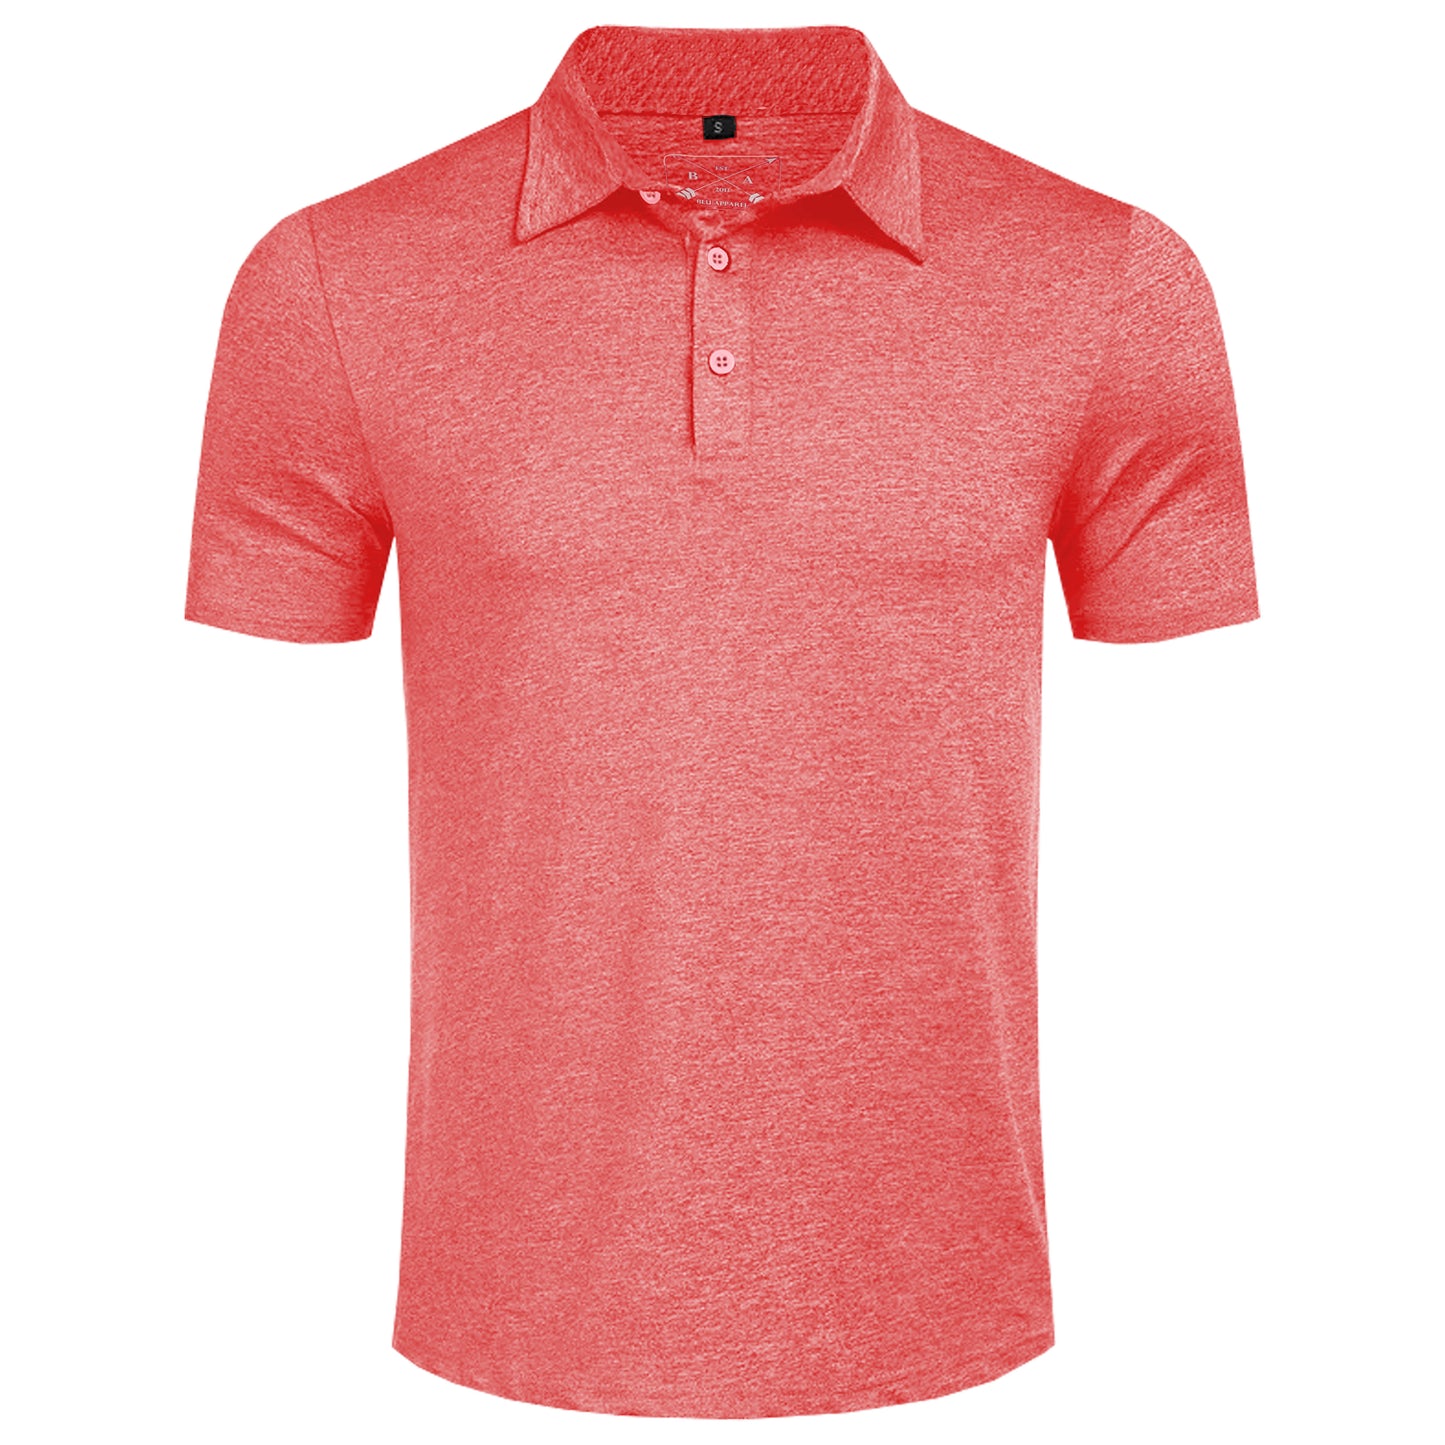 Men's Dry Fit Golf Polo - Charcoal Marl